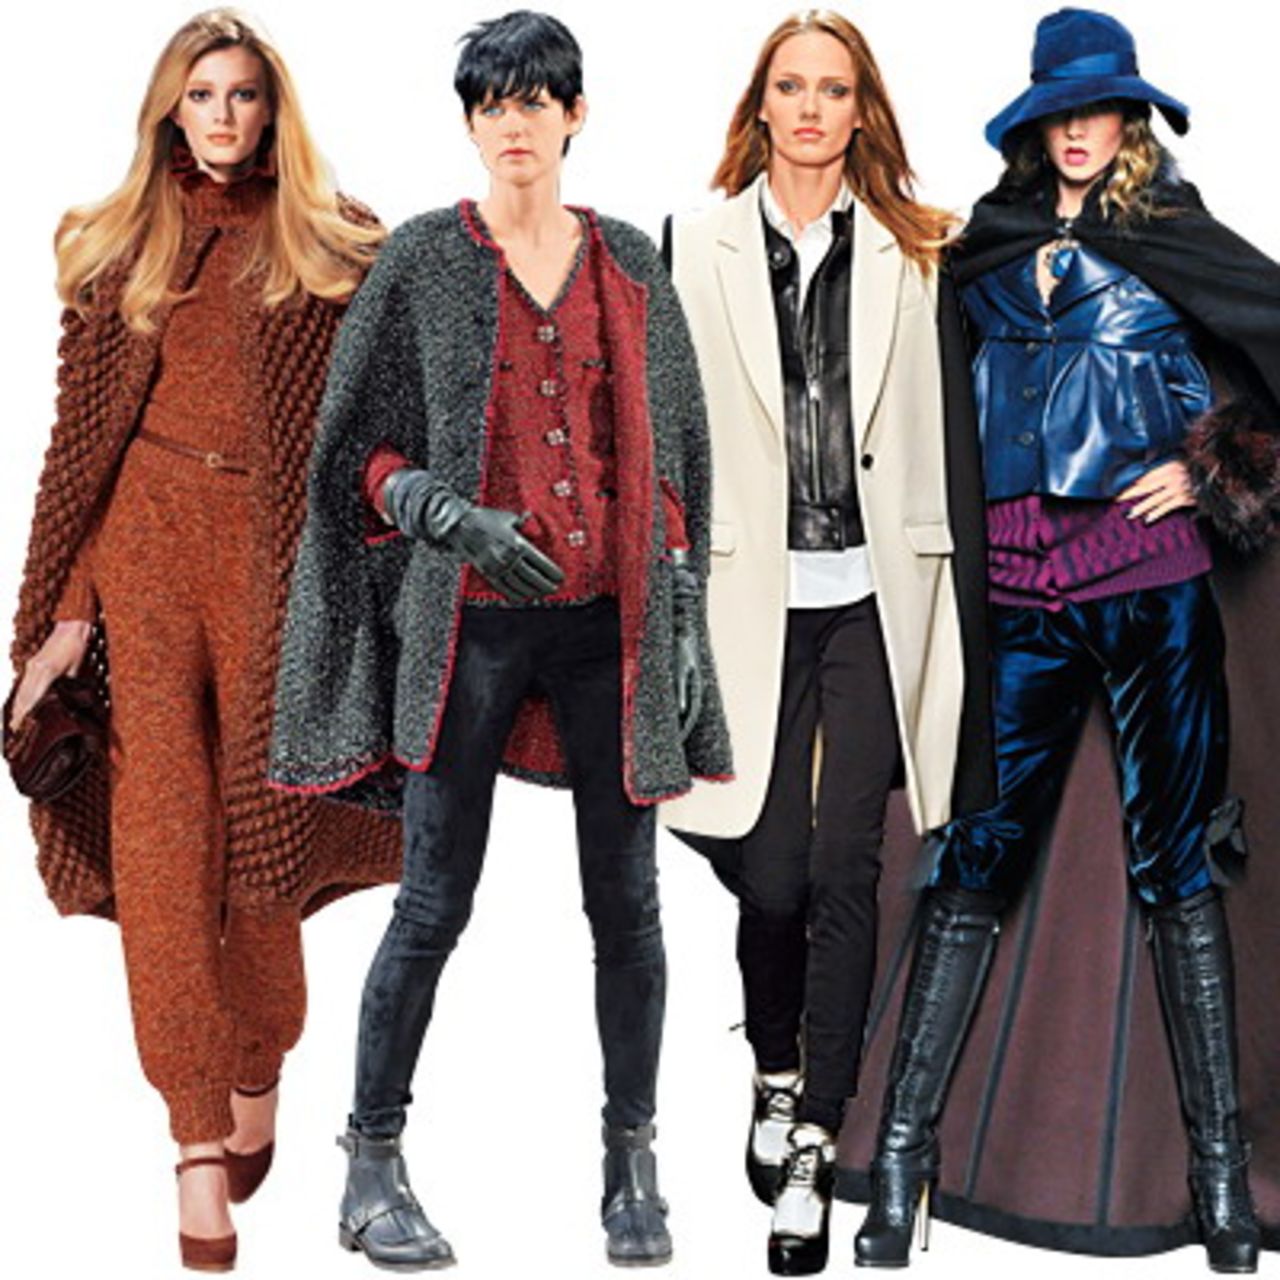 The cape -- (left to right) Chloé, Chanel, DKNY, Christian Dior.